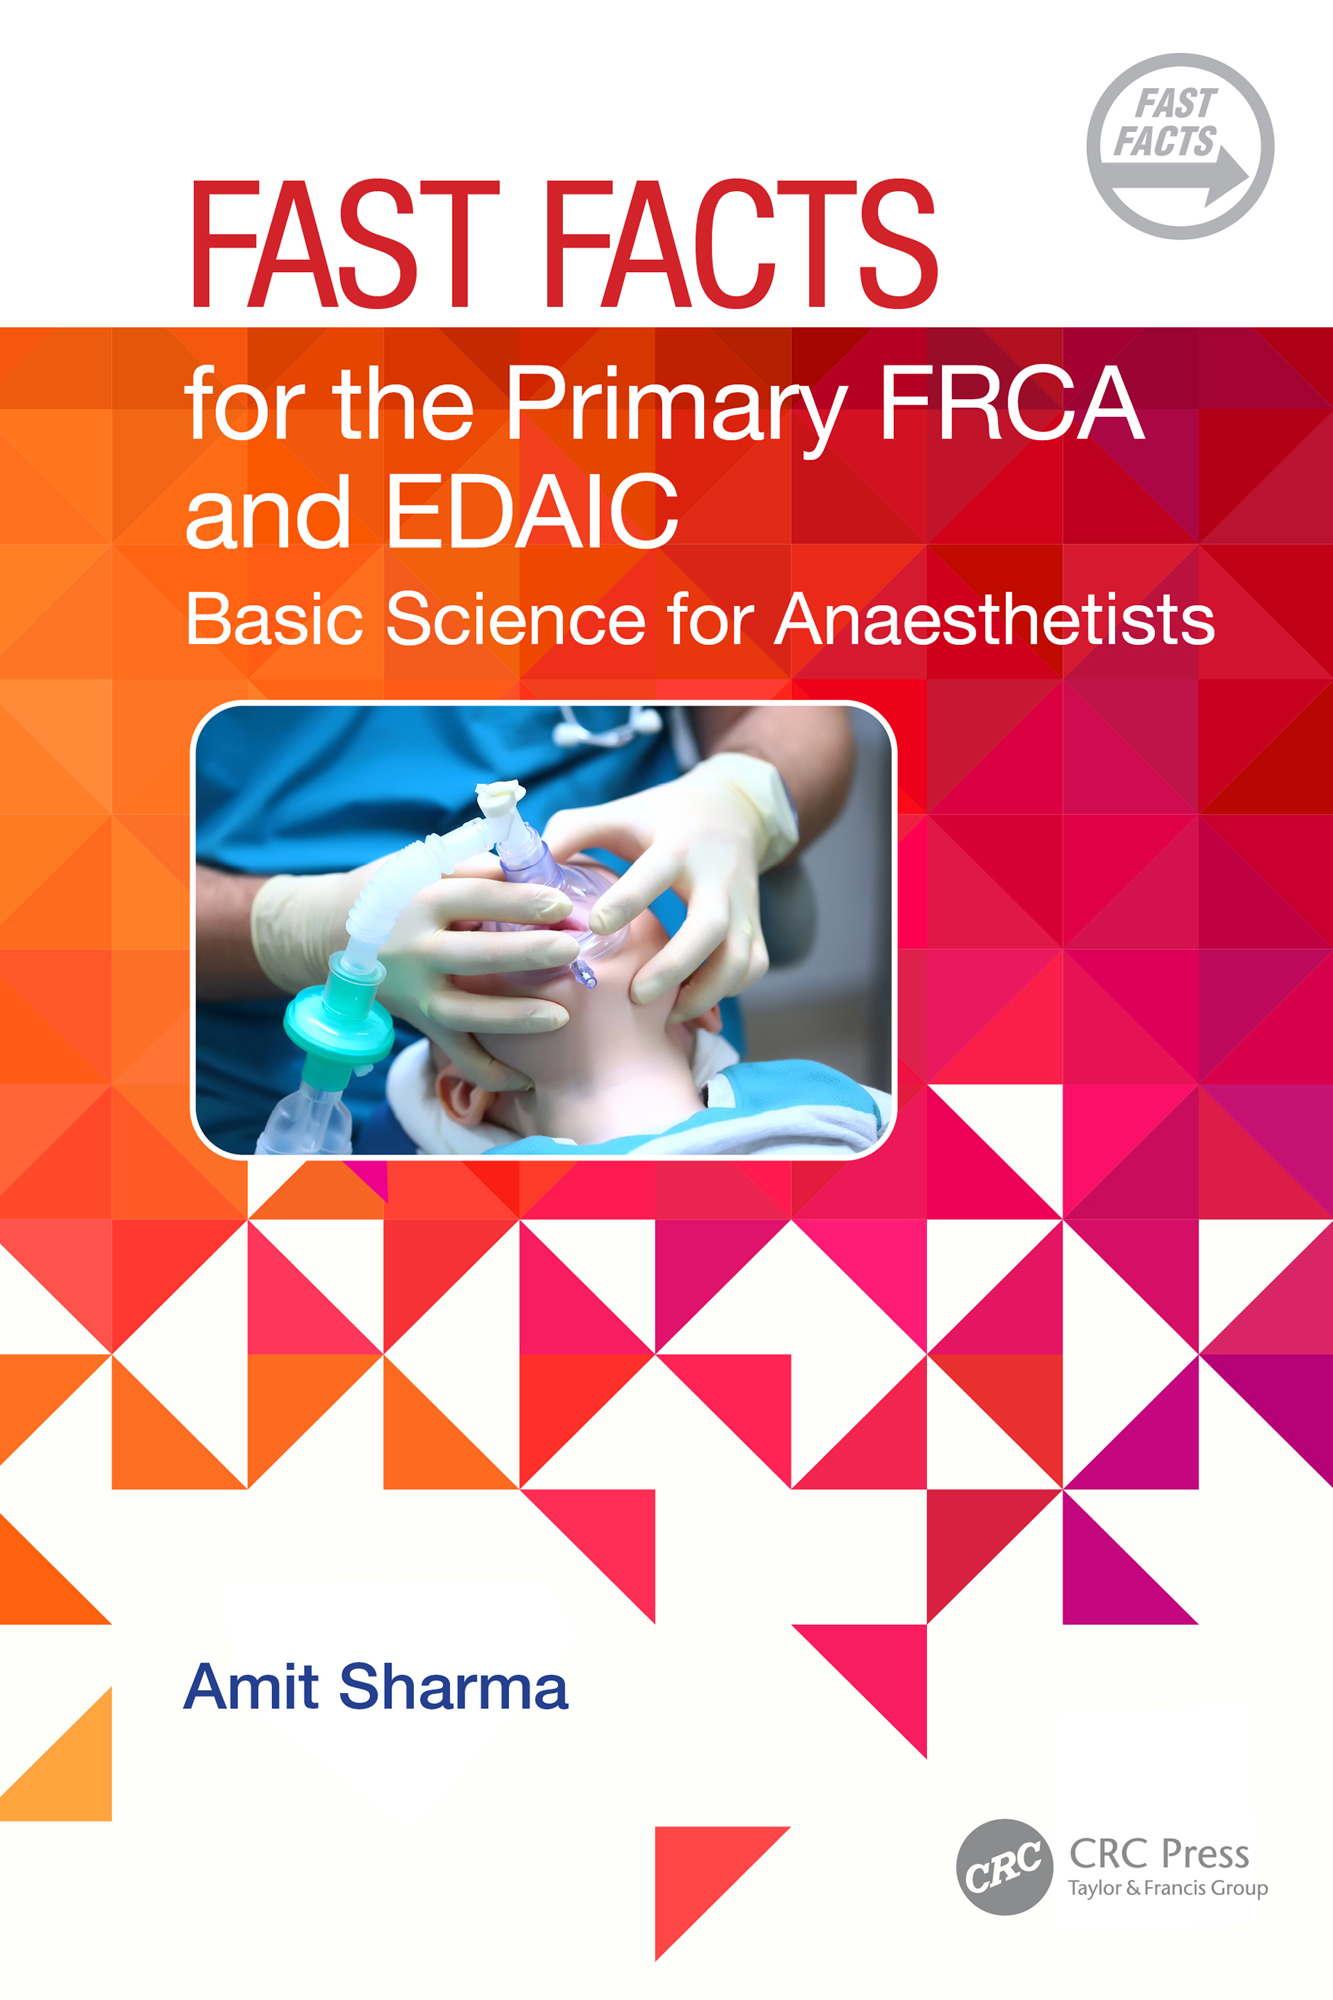 Fast Facts For The Primary FRCA And EDAIC Basic Science For Anaesthetists